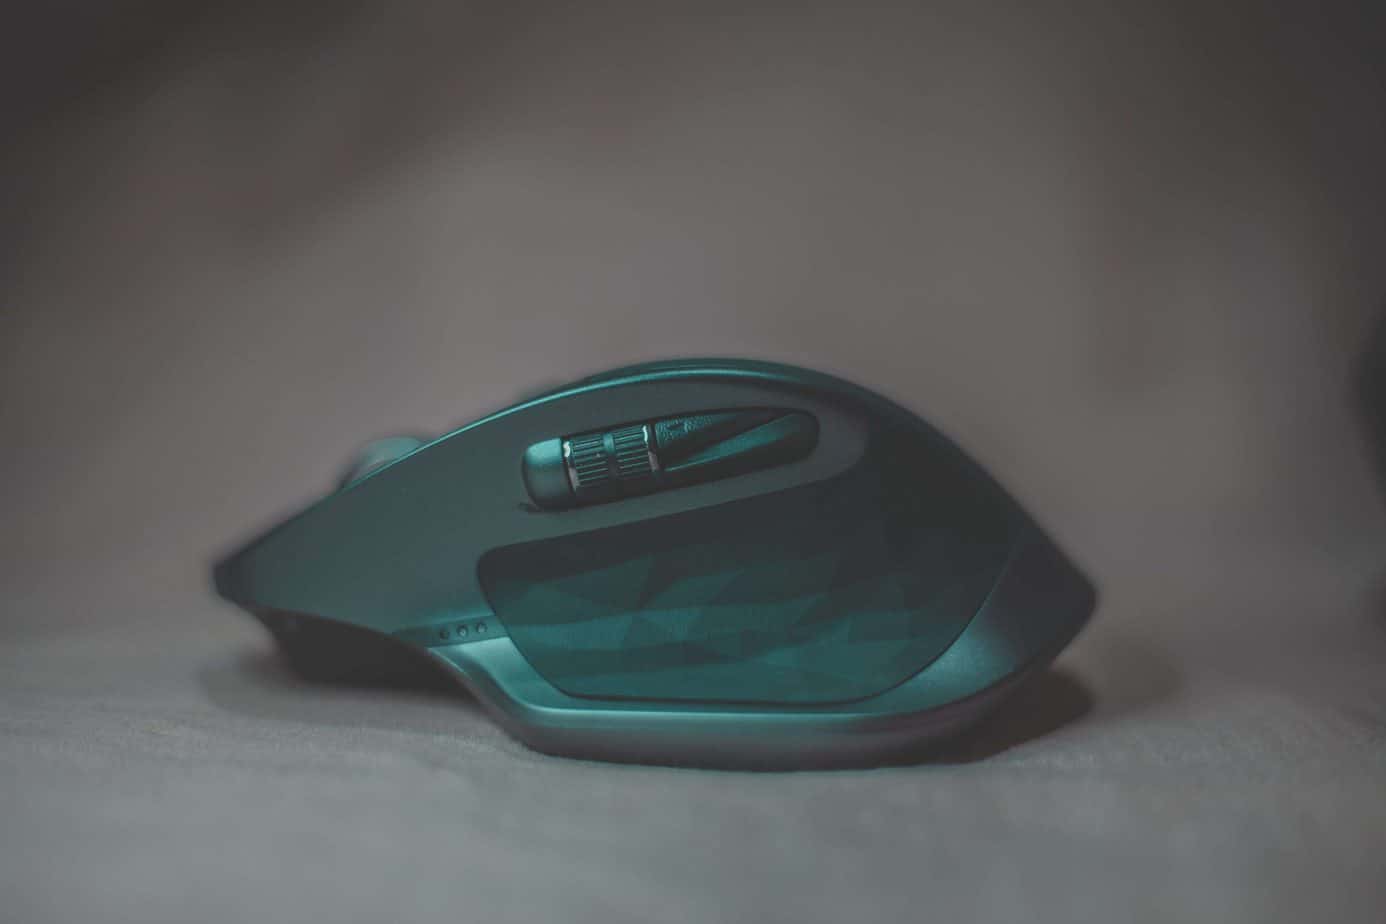 The rescue of tired hands: ergonomic computer mouse